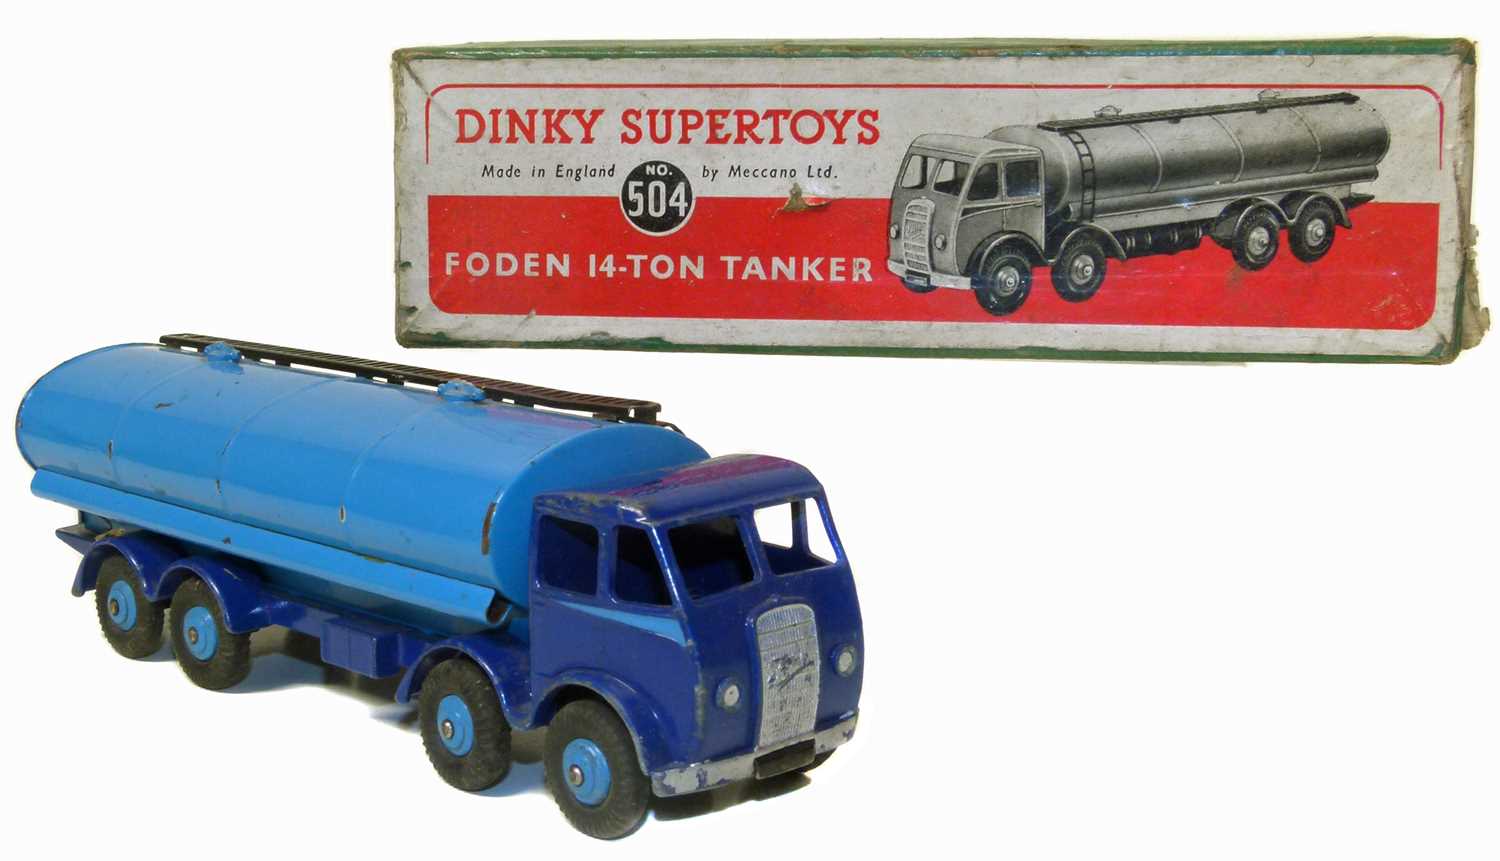 Lot 117 - Dinky Supertoys, Foden 14-Ton tanker No. 504 with original box.